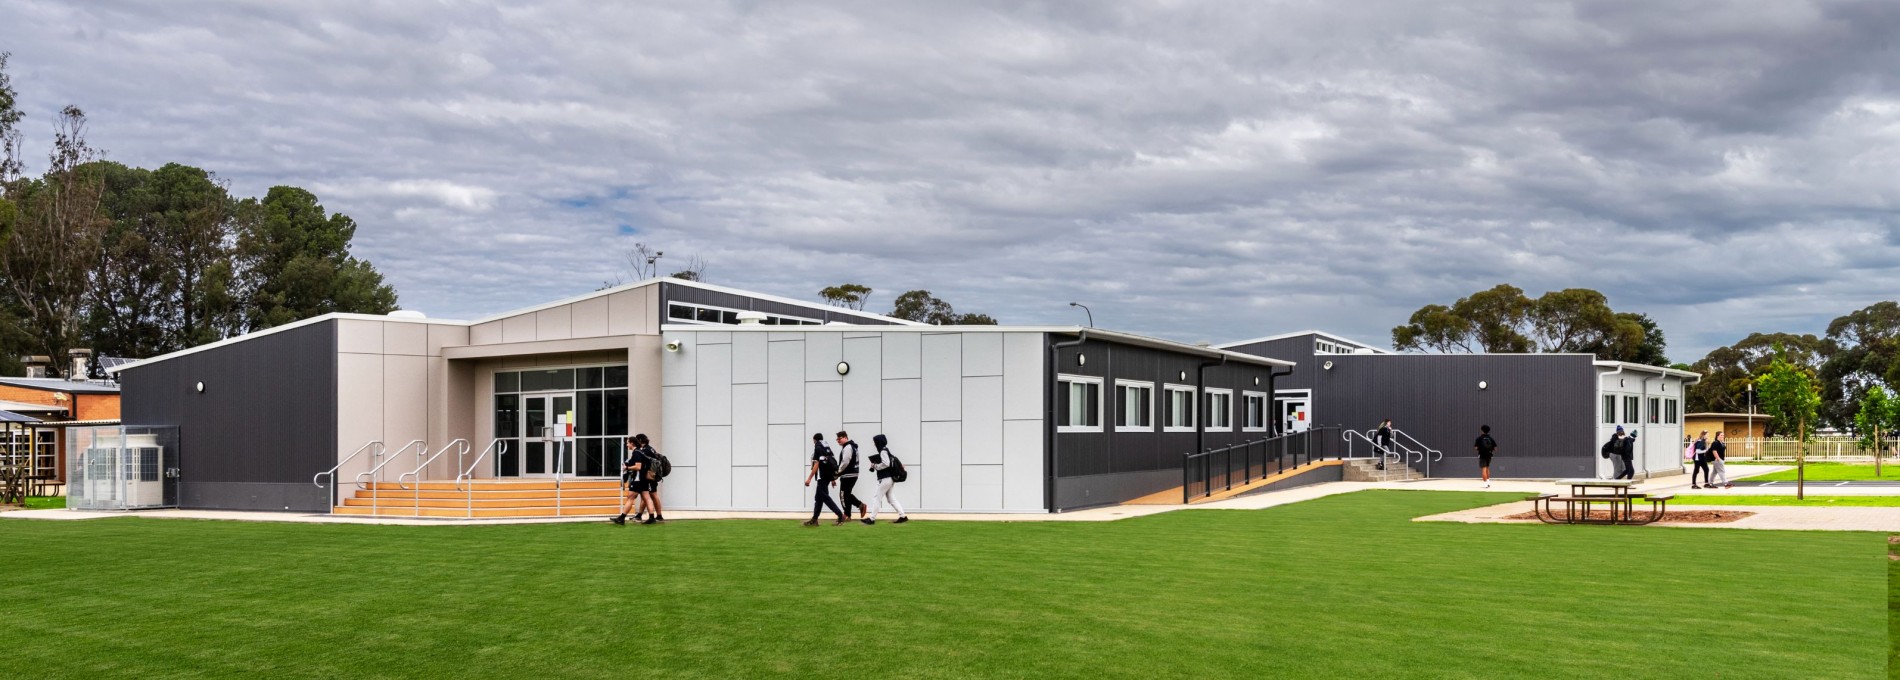 Modular School Building Exterior with Lawn in front